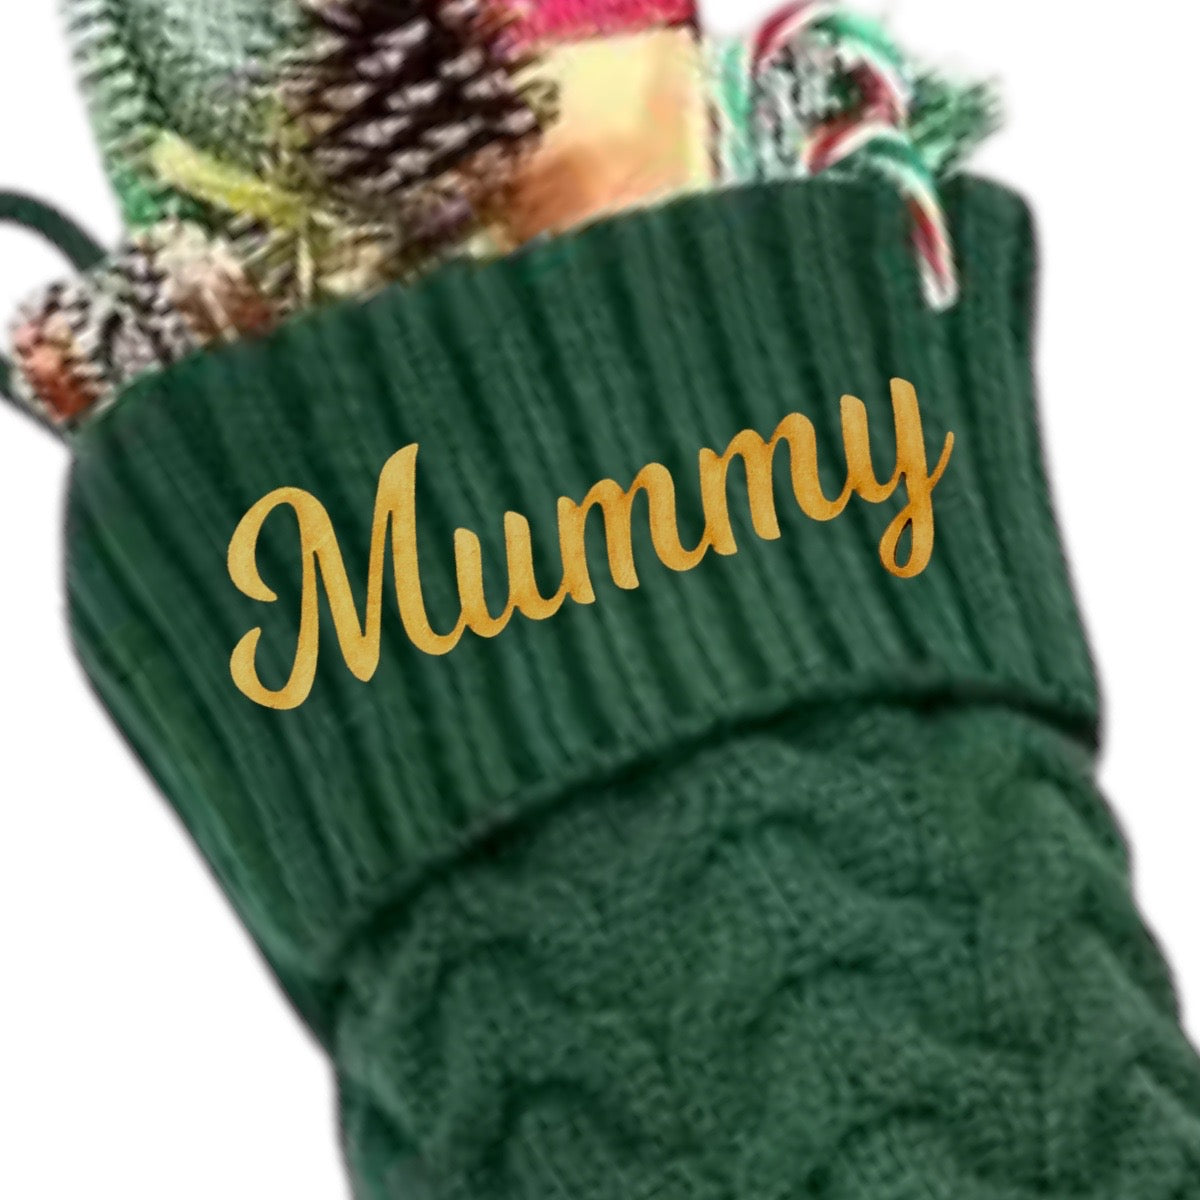 Personalized Christmas Stockings Knitted - Red, Green, White, Gray